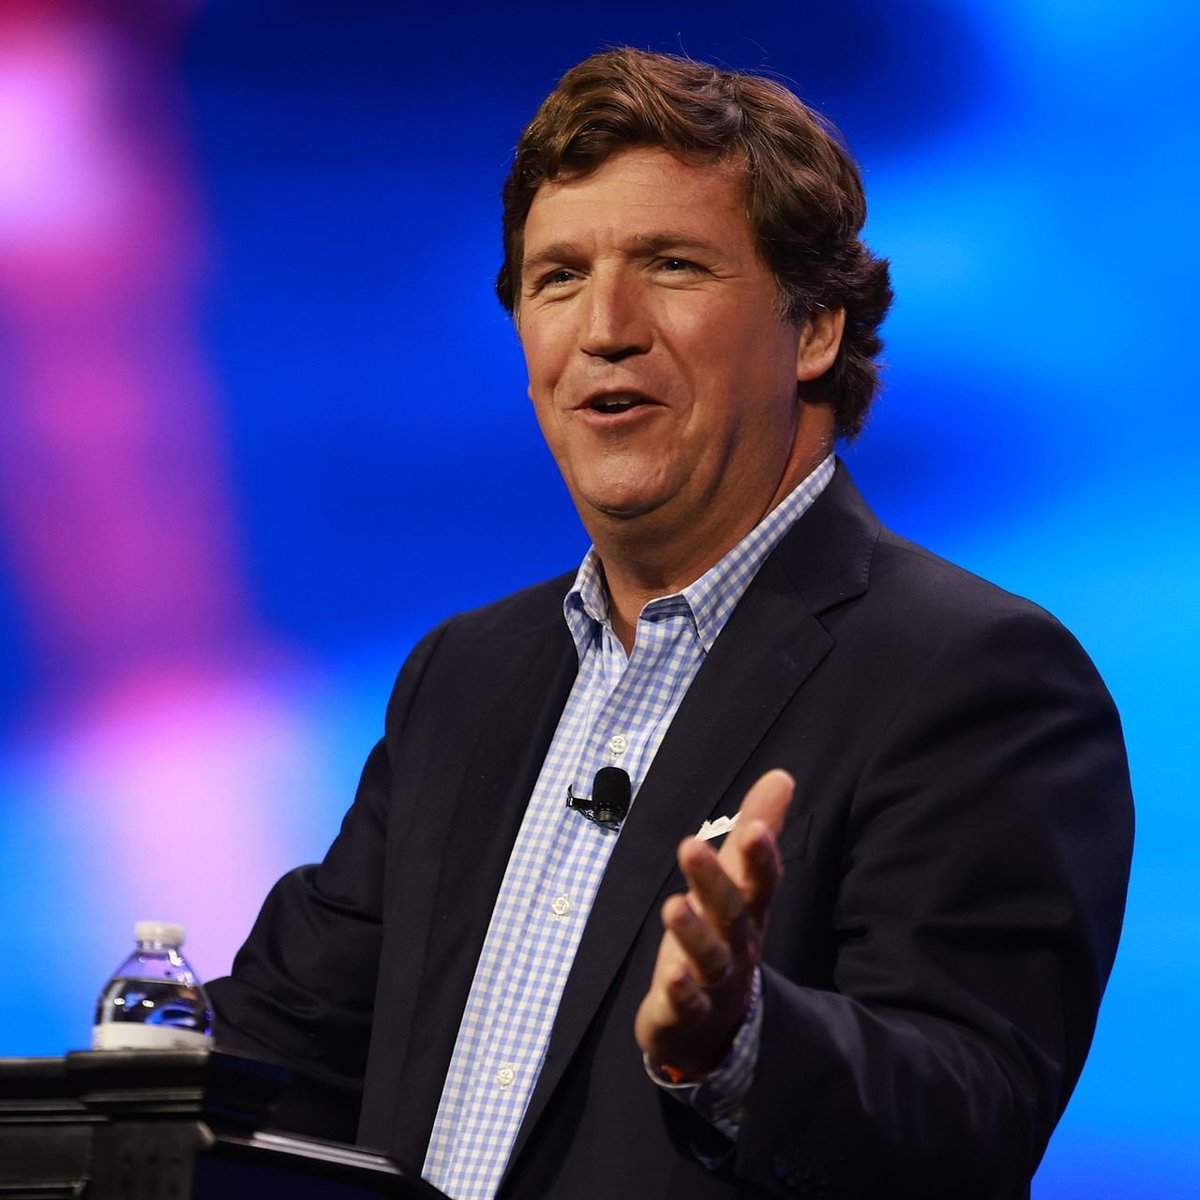 Do you agree with Tucker Carlson says we should BAN electronic voting machines and mail-in ballots? YEE OR NO??